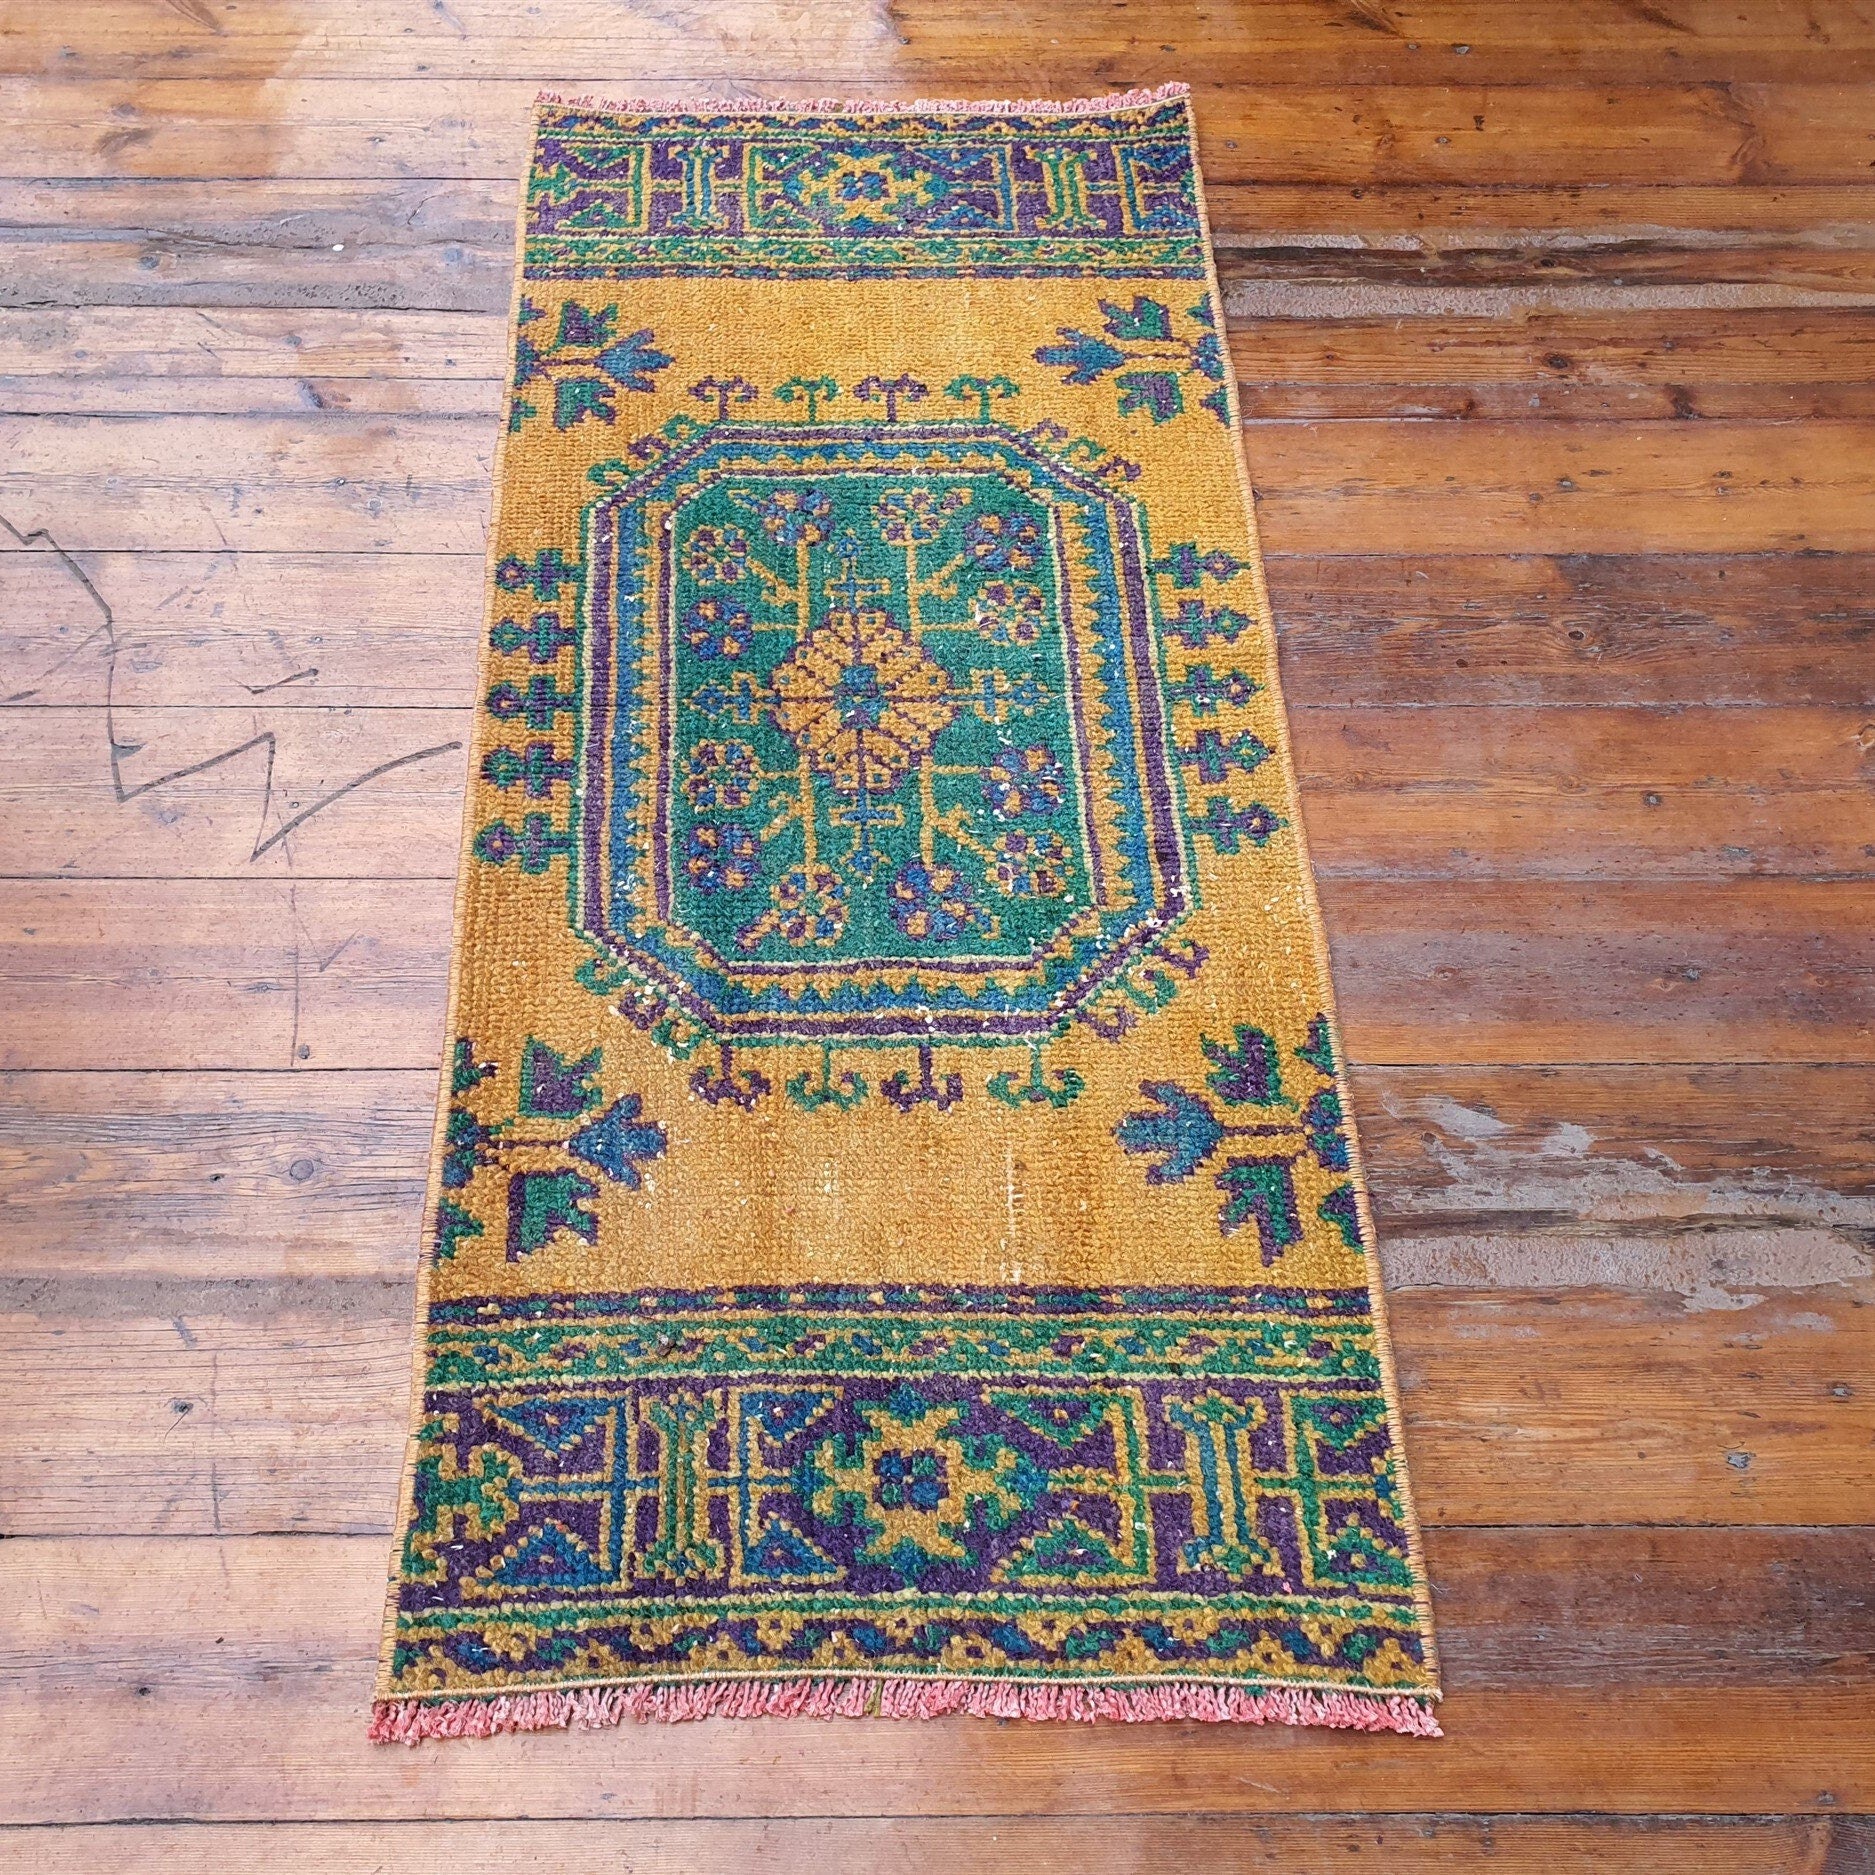 Small Turkish Rug, 4 ft 3 in x 1 ft 8 in, Apricot Orange and Teal Green / Grey Vintage Faded Distressed Door Mat